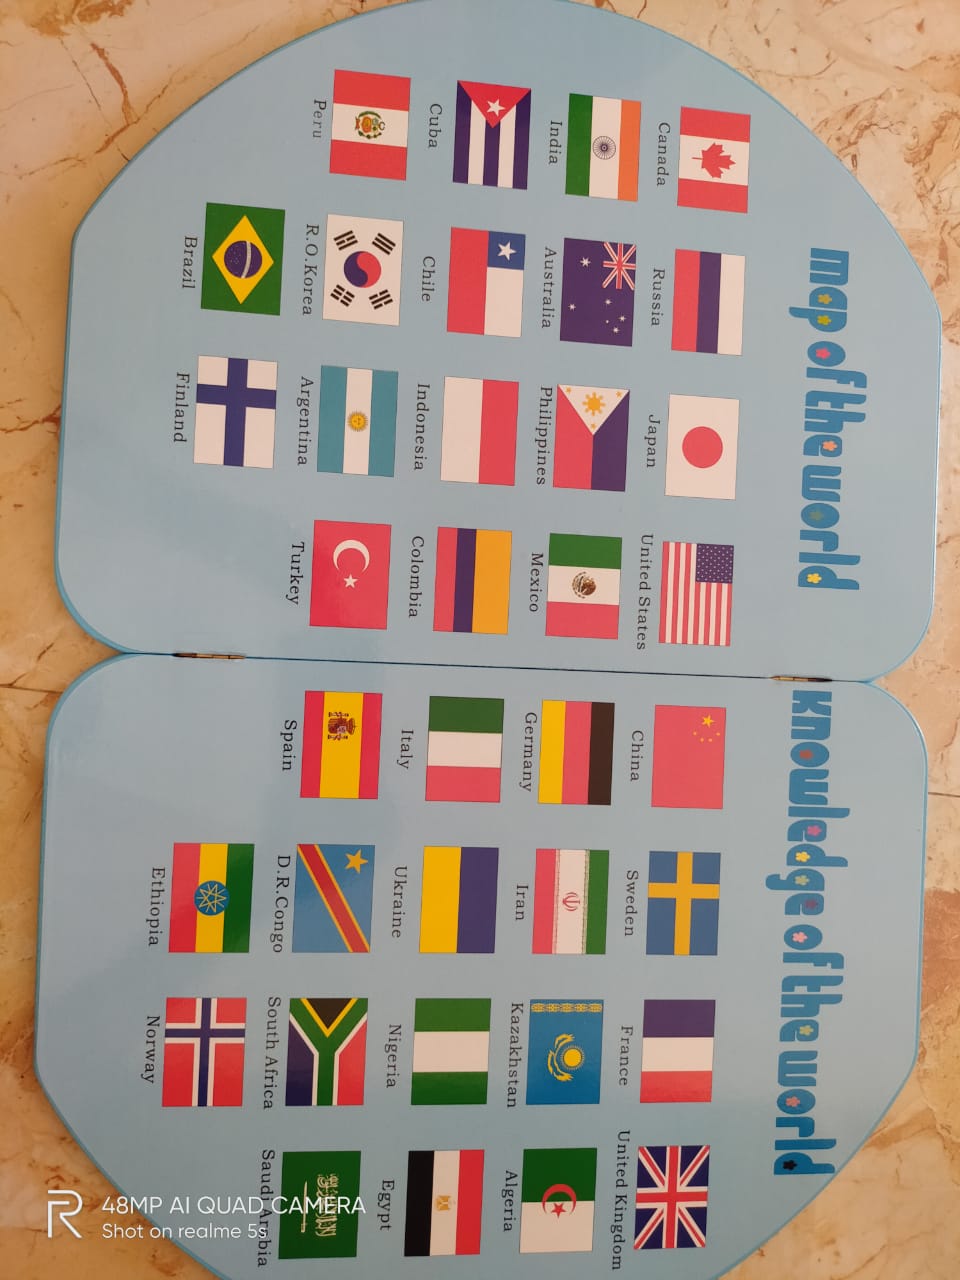 Wooden World Map with flags for Kids-SHTM1085